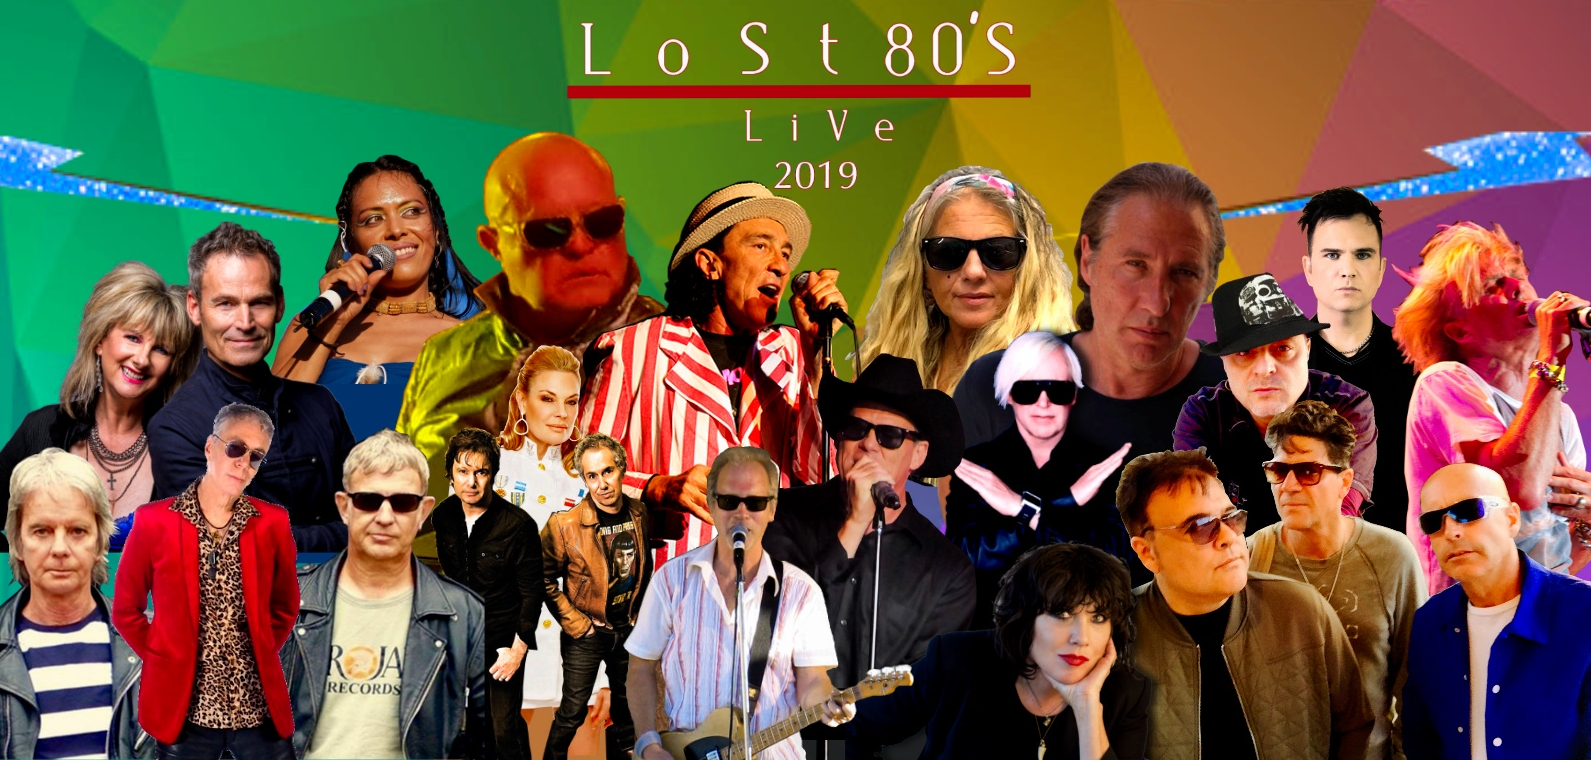 Buy Now! Lost 80s Live!